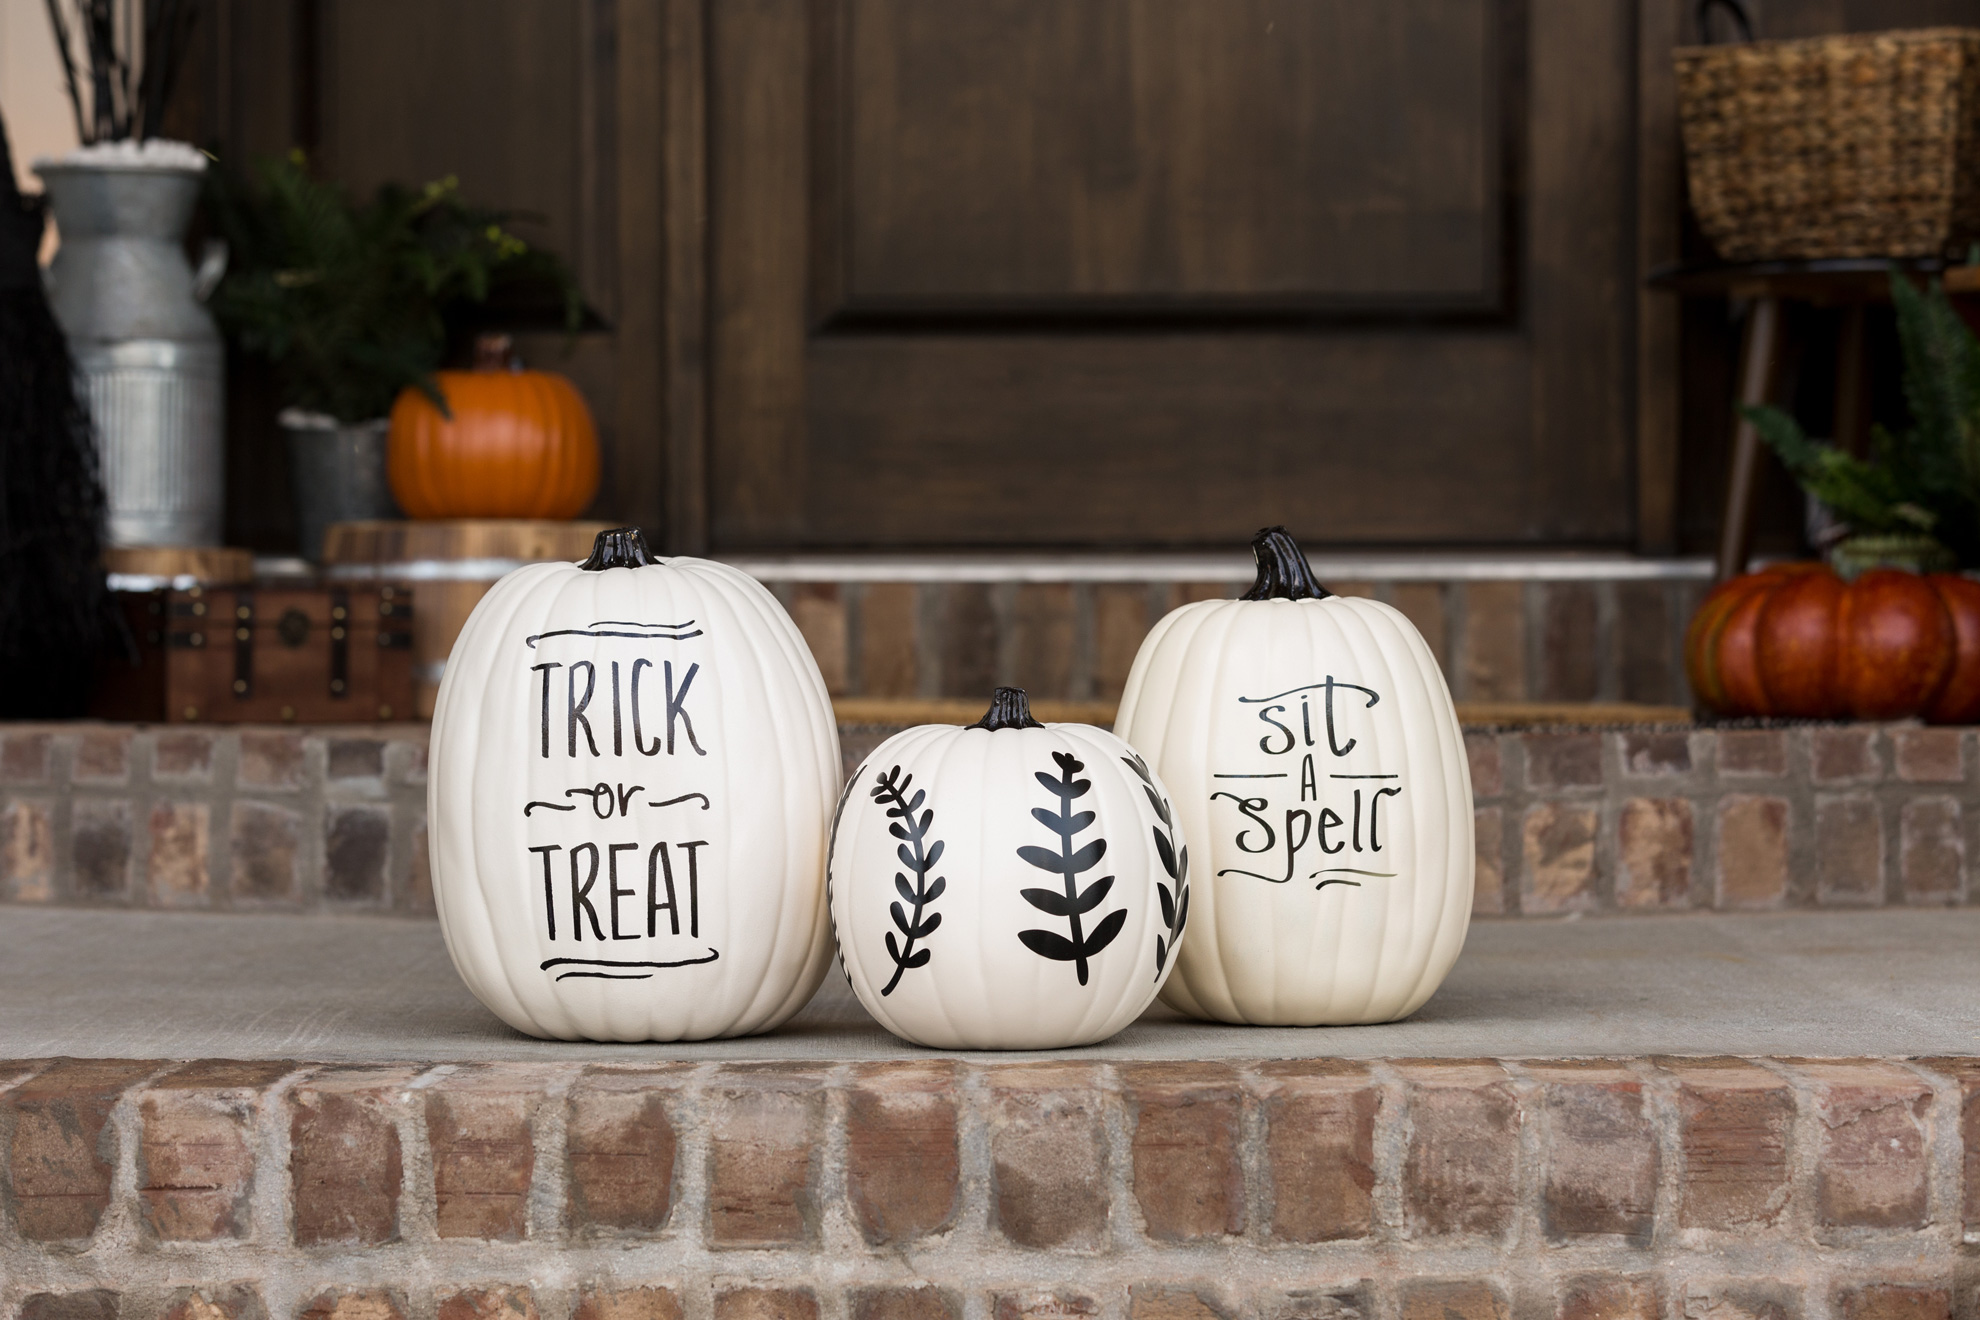 7 gourd-gess ways to decorate your pumpkins this Halloween